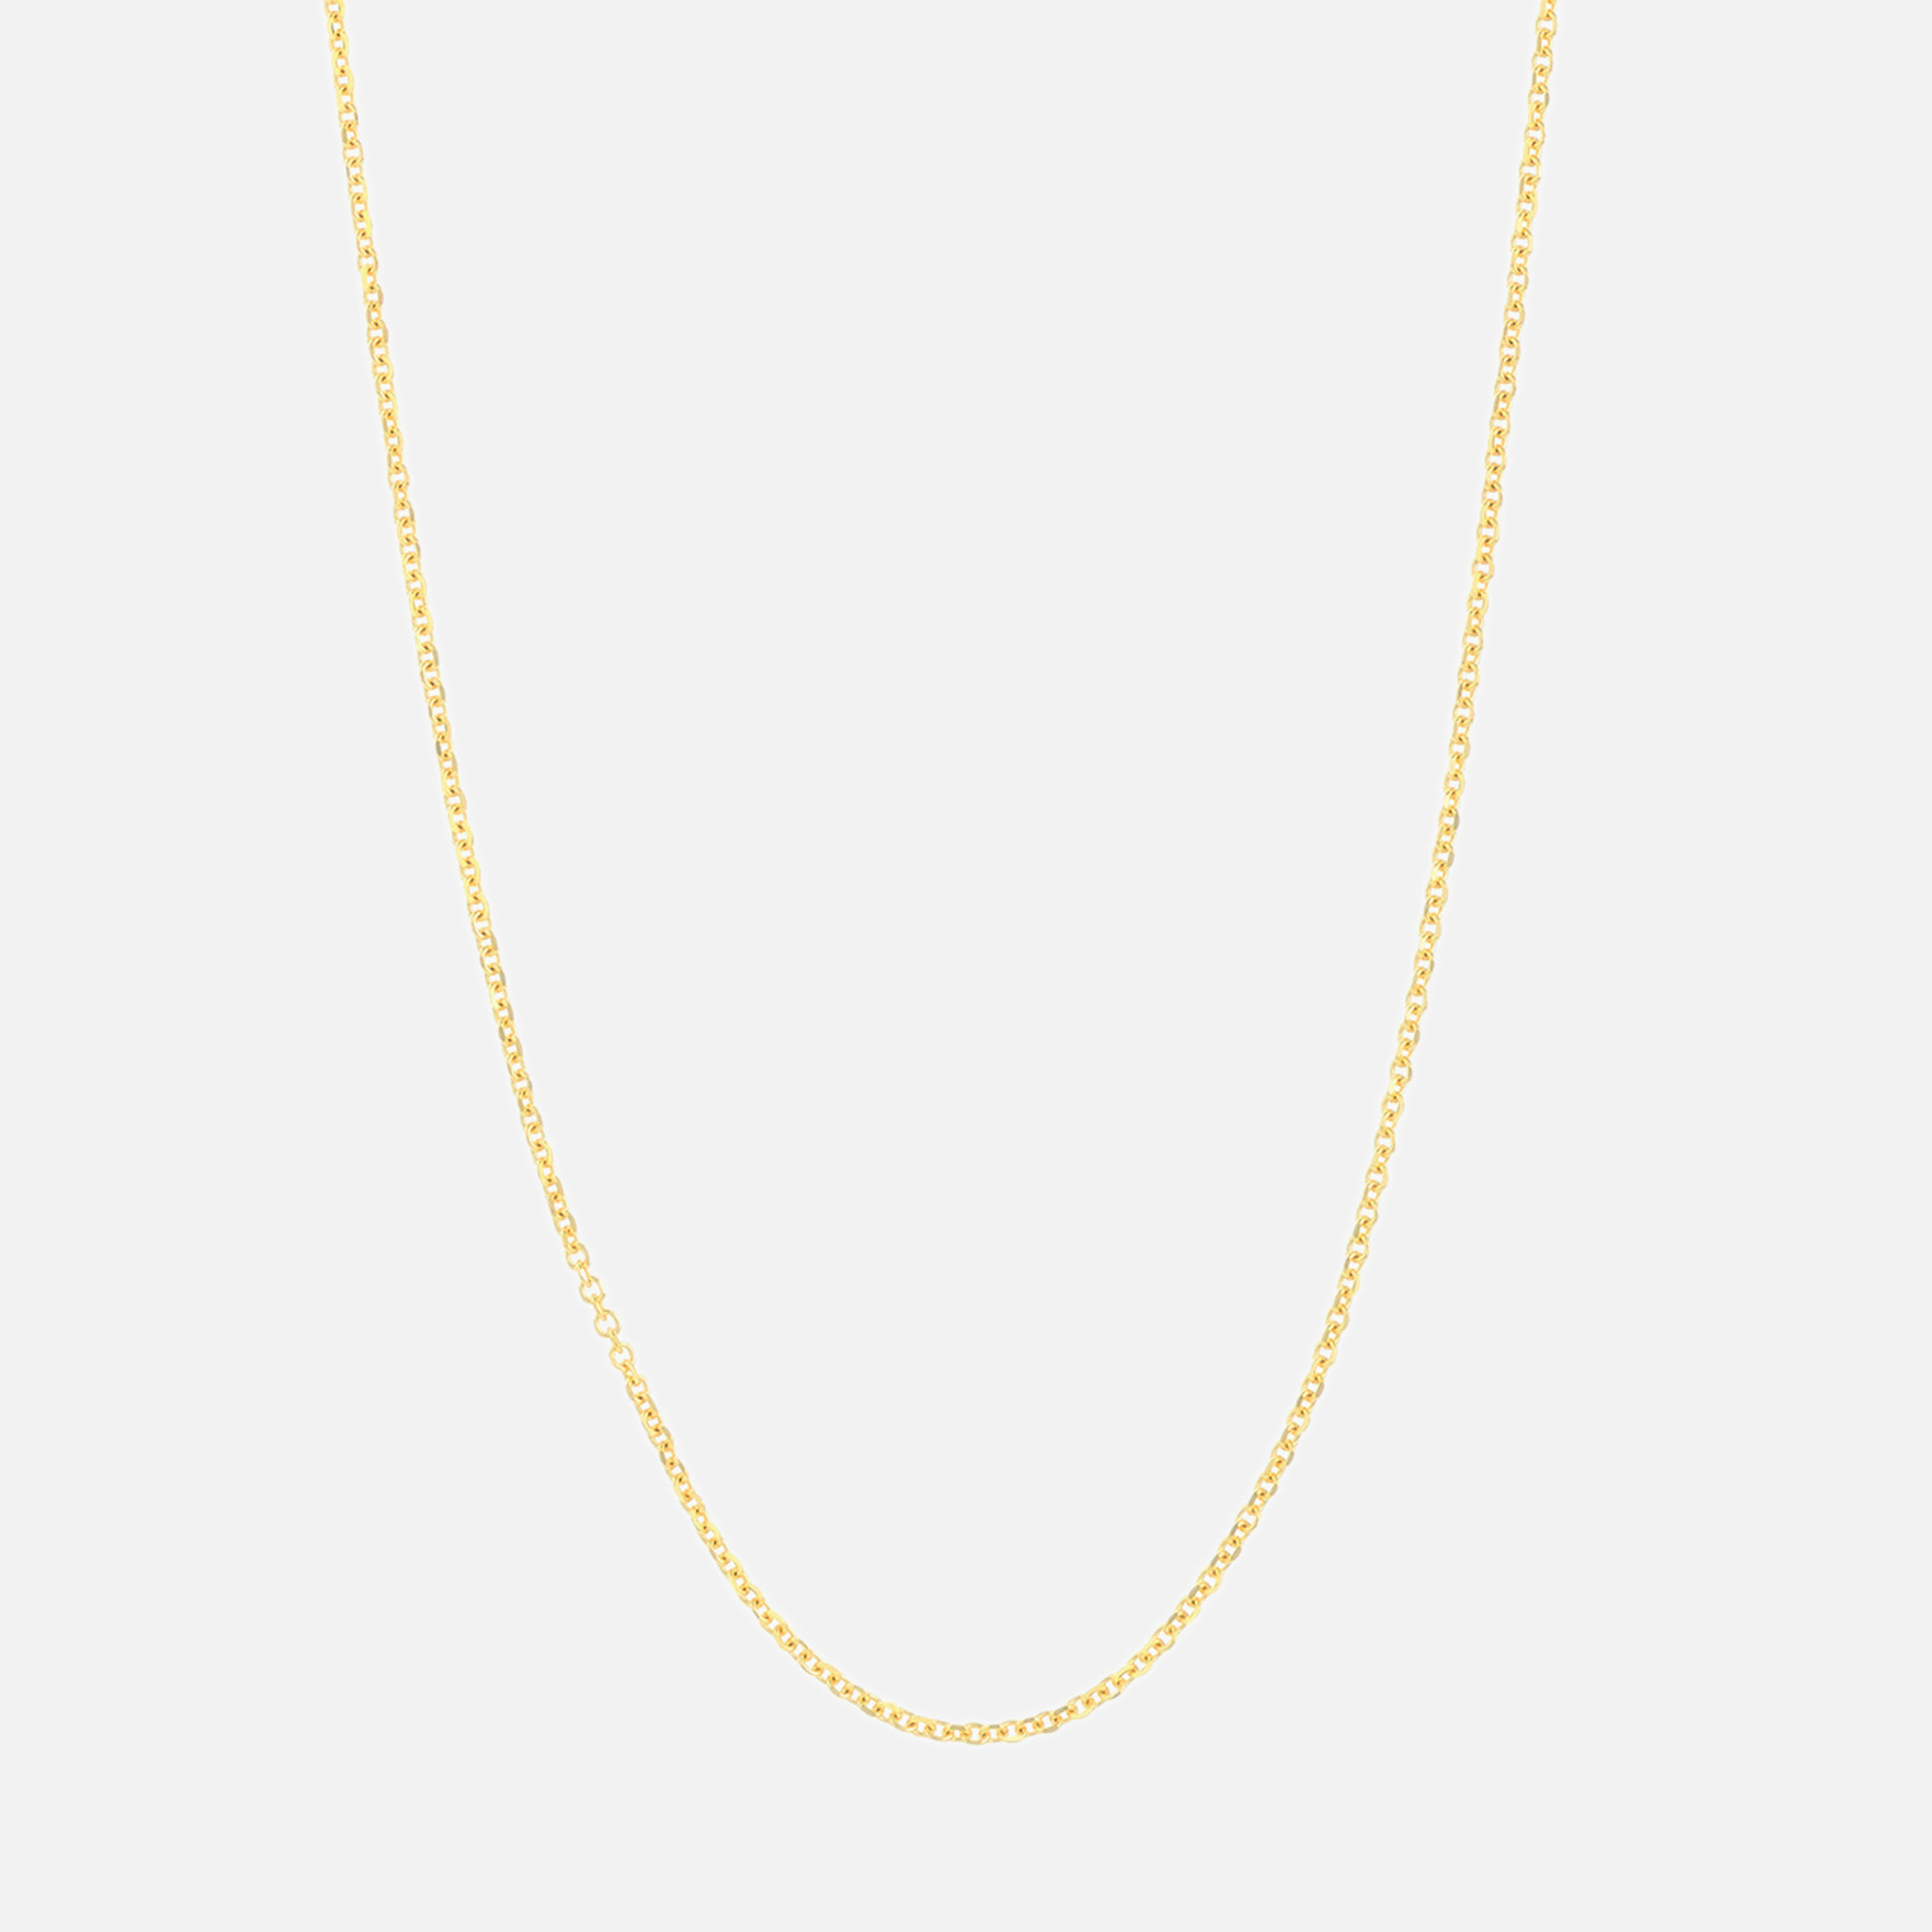 Shiny diamond cut cable chain necklace crafted in 10k yellow gold, slinky and flecked with diamond-cut chain links.